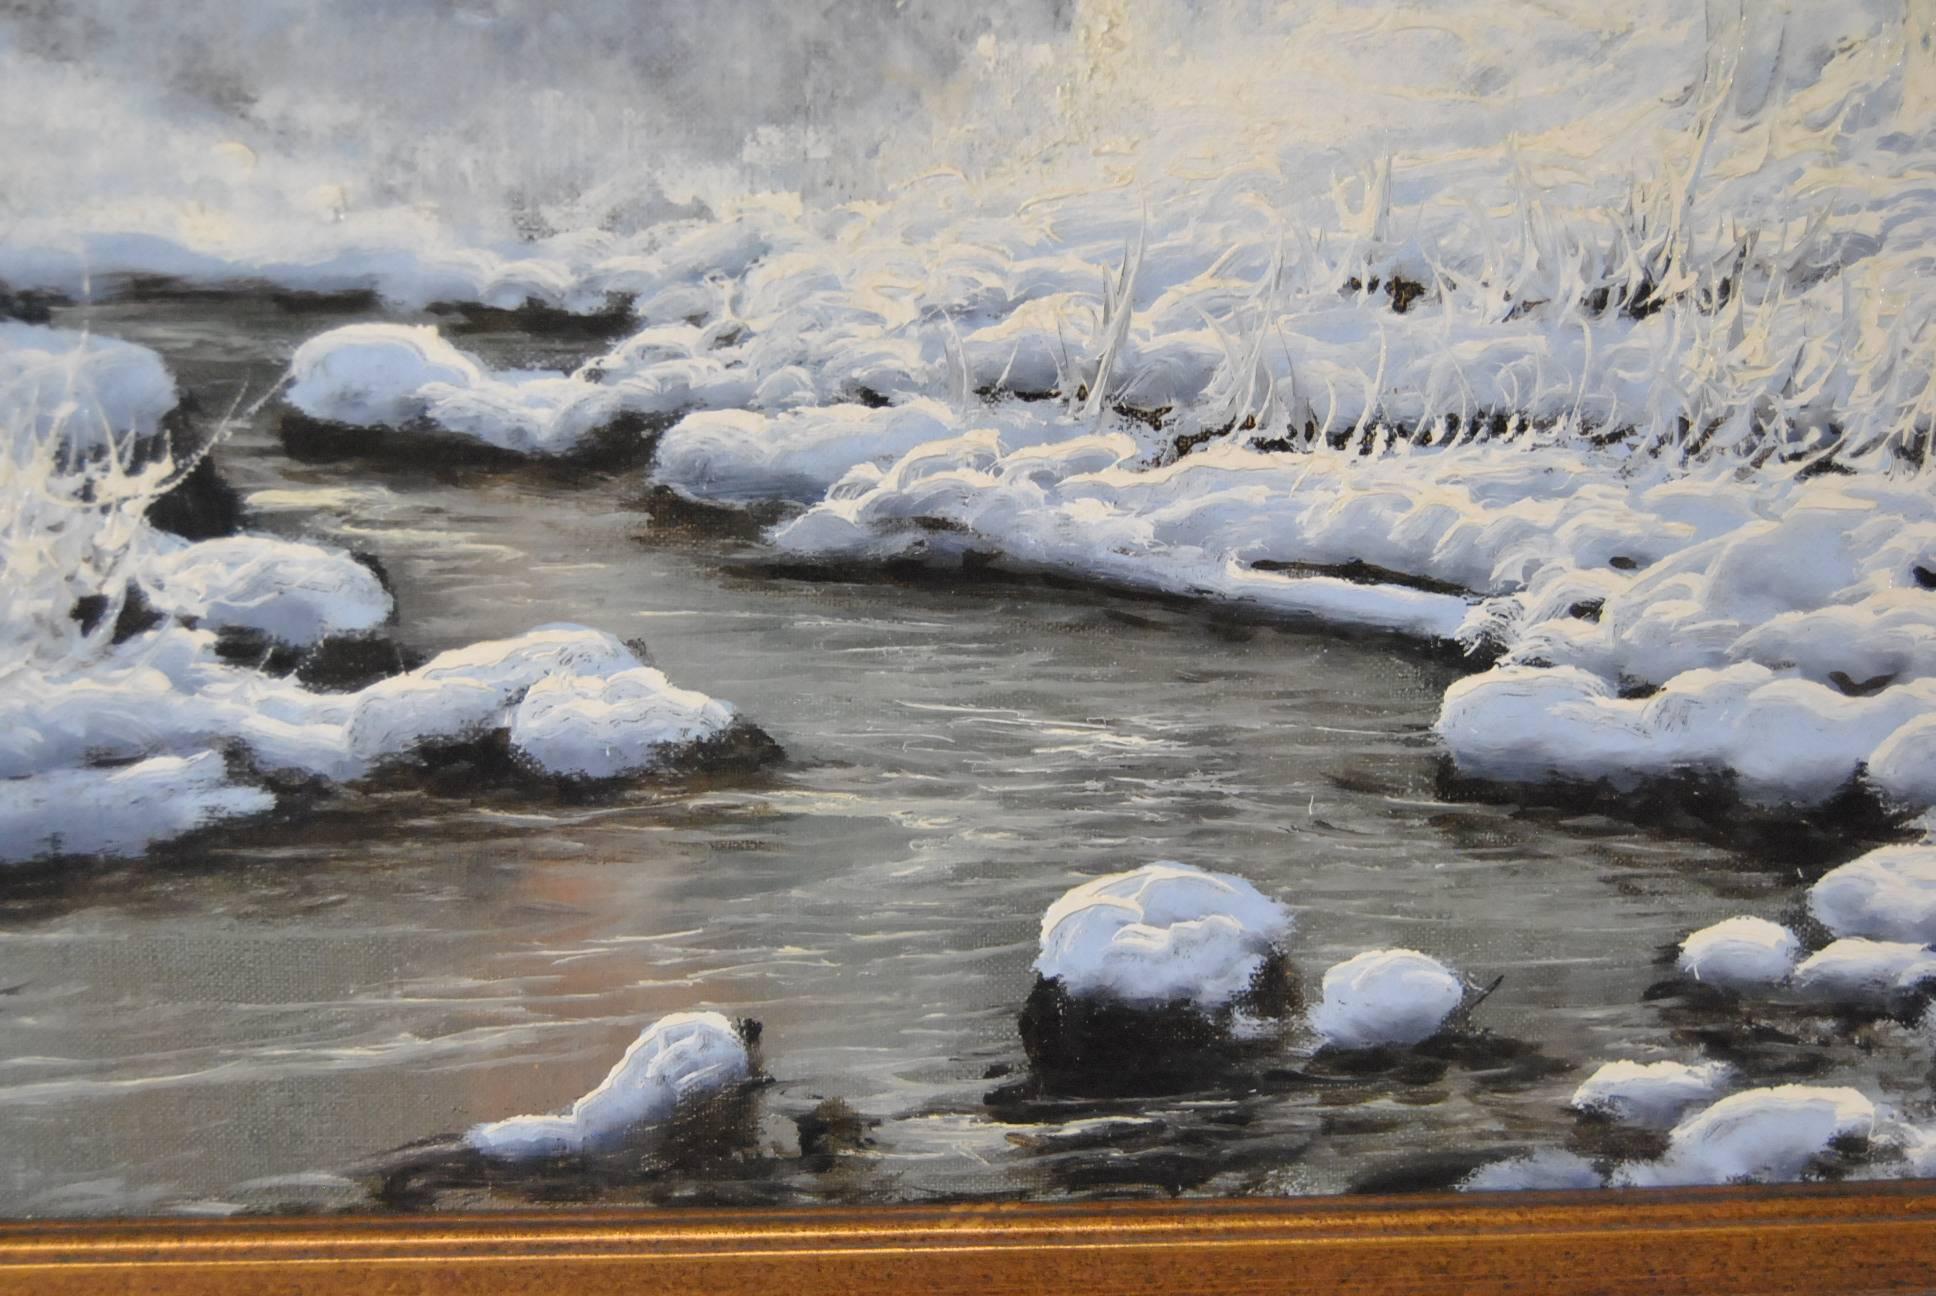 Hungarian Winter Scene Oil Painting on Canvas by Laszlo Neogrady